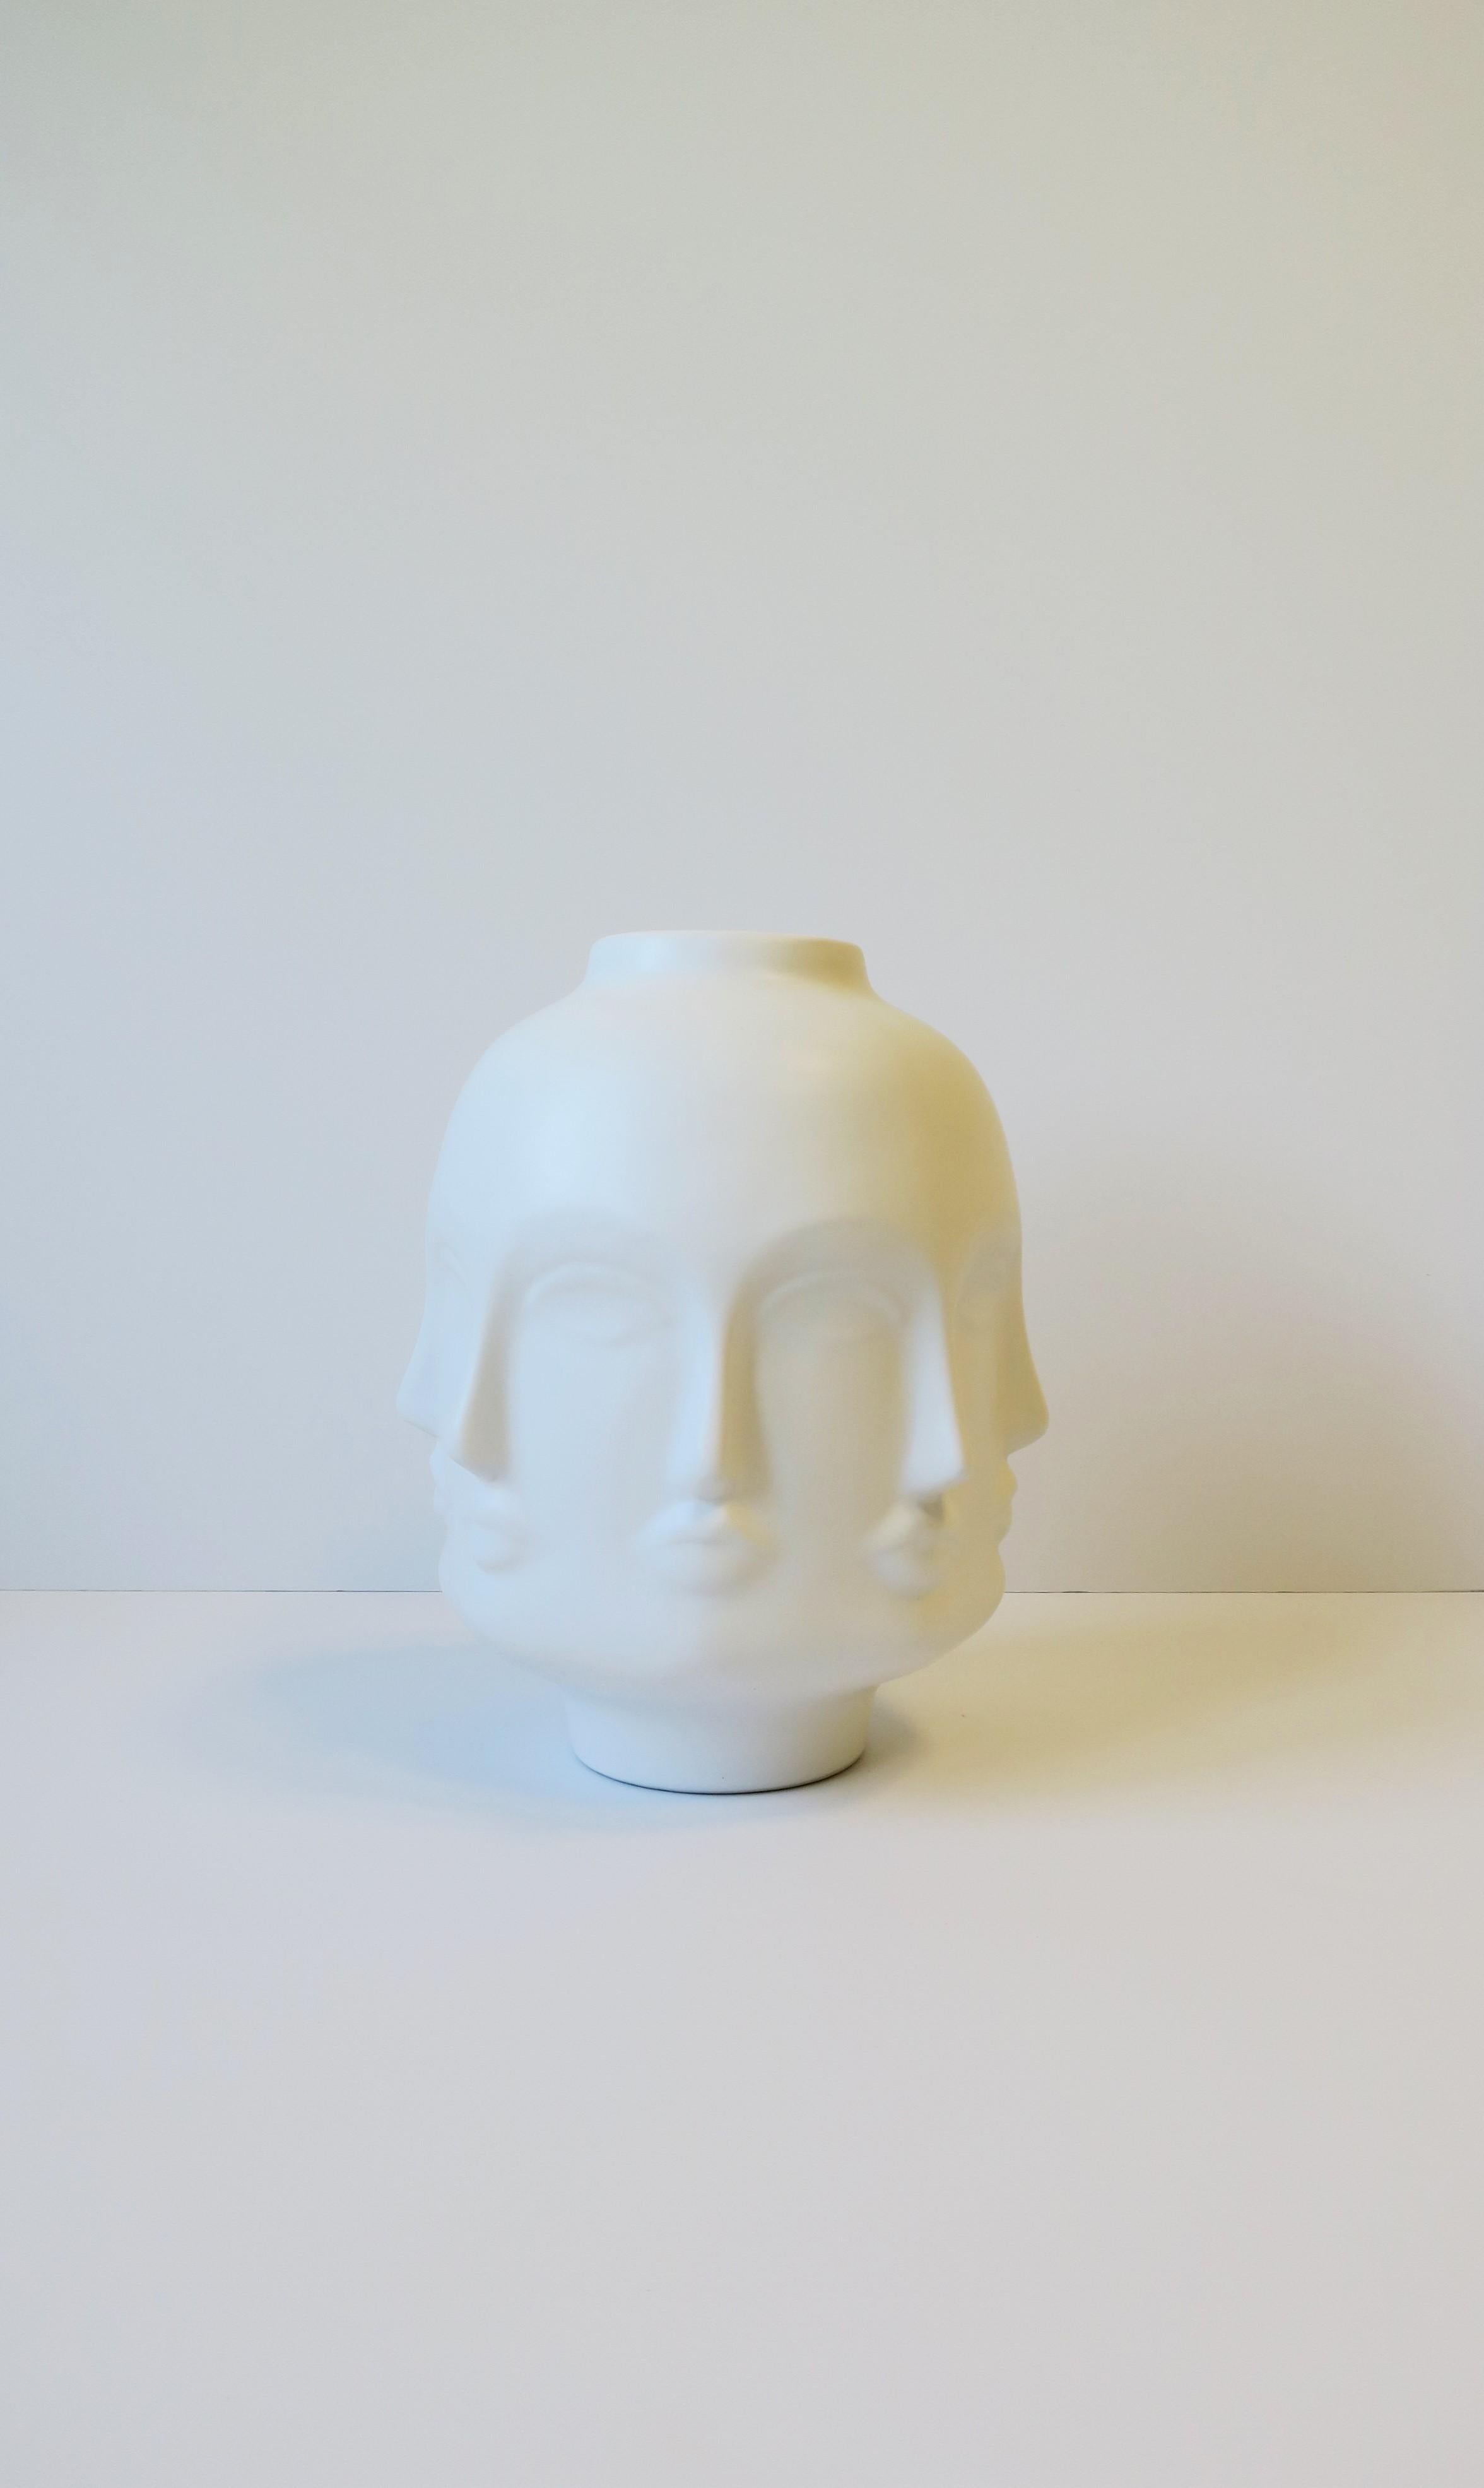 A relatively large white ceramic face or 'faces' vase in the style of Italian designer Piero Fornasetti. This sculpture vase can make a great statement piece a room; bookshelf, cocktail table, credenza, office, library, kitchen, powder room, etc.